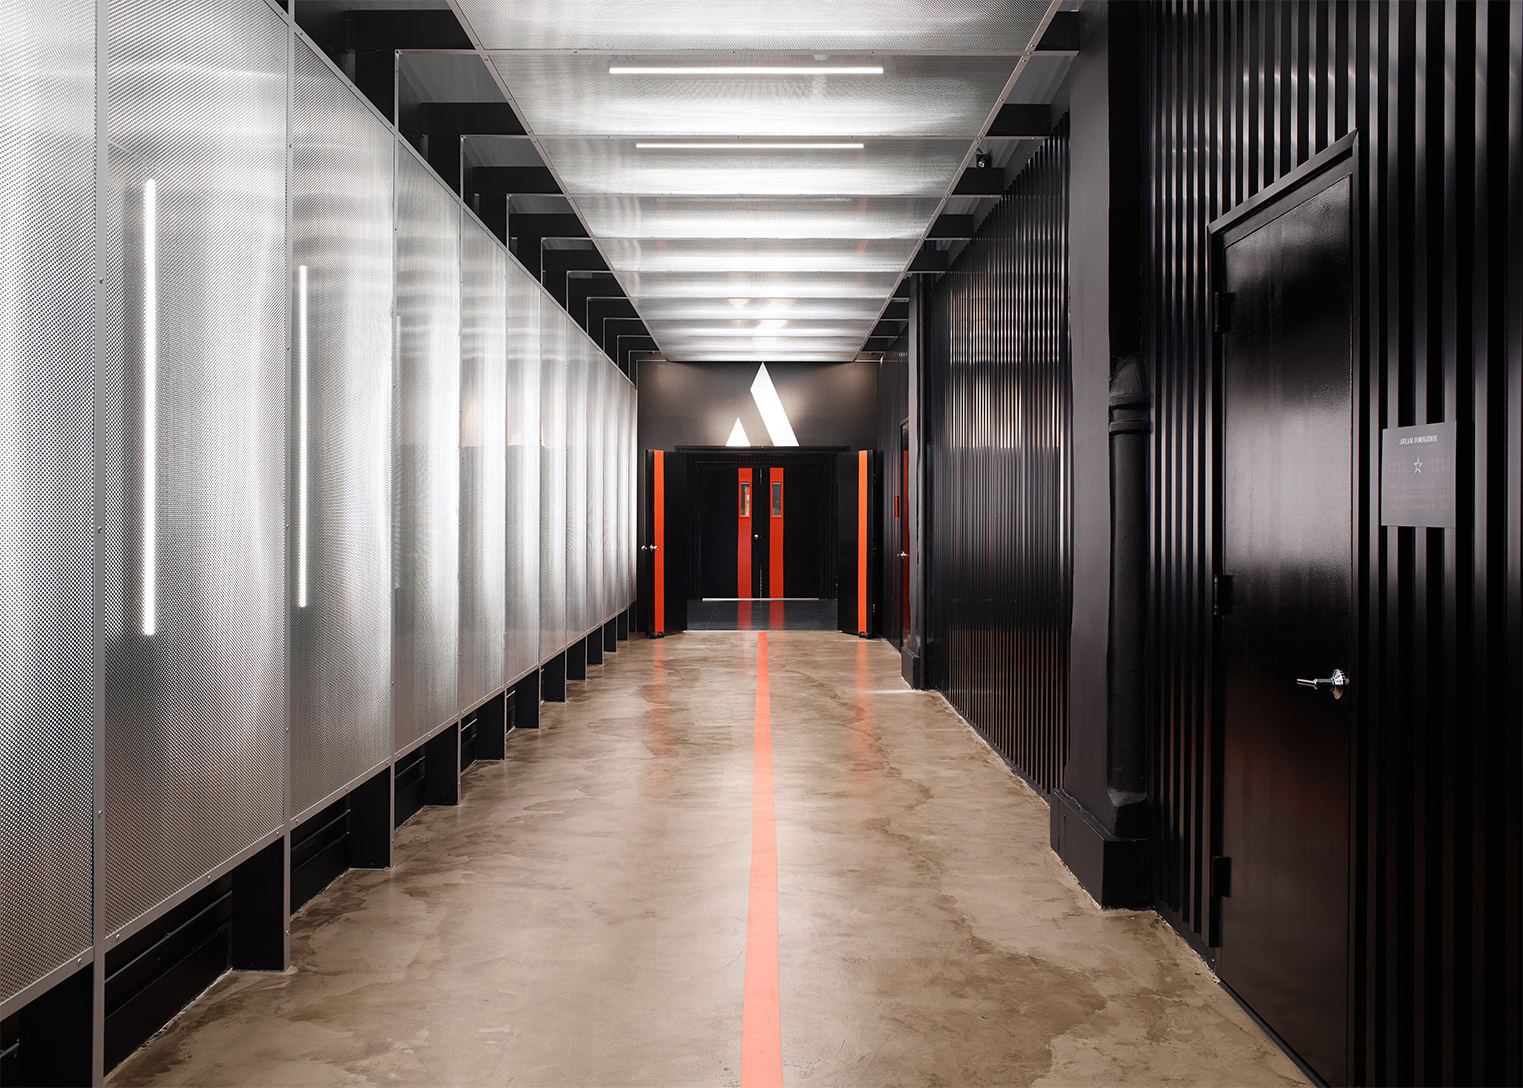 Linear ceiling and wall lights line the Hall of Champions at AARMY pop-up fitness studio, invigorating patrons as they enter the fitness area.